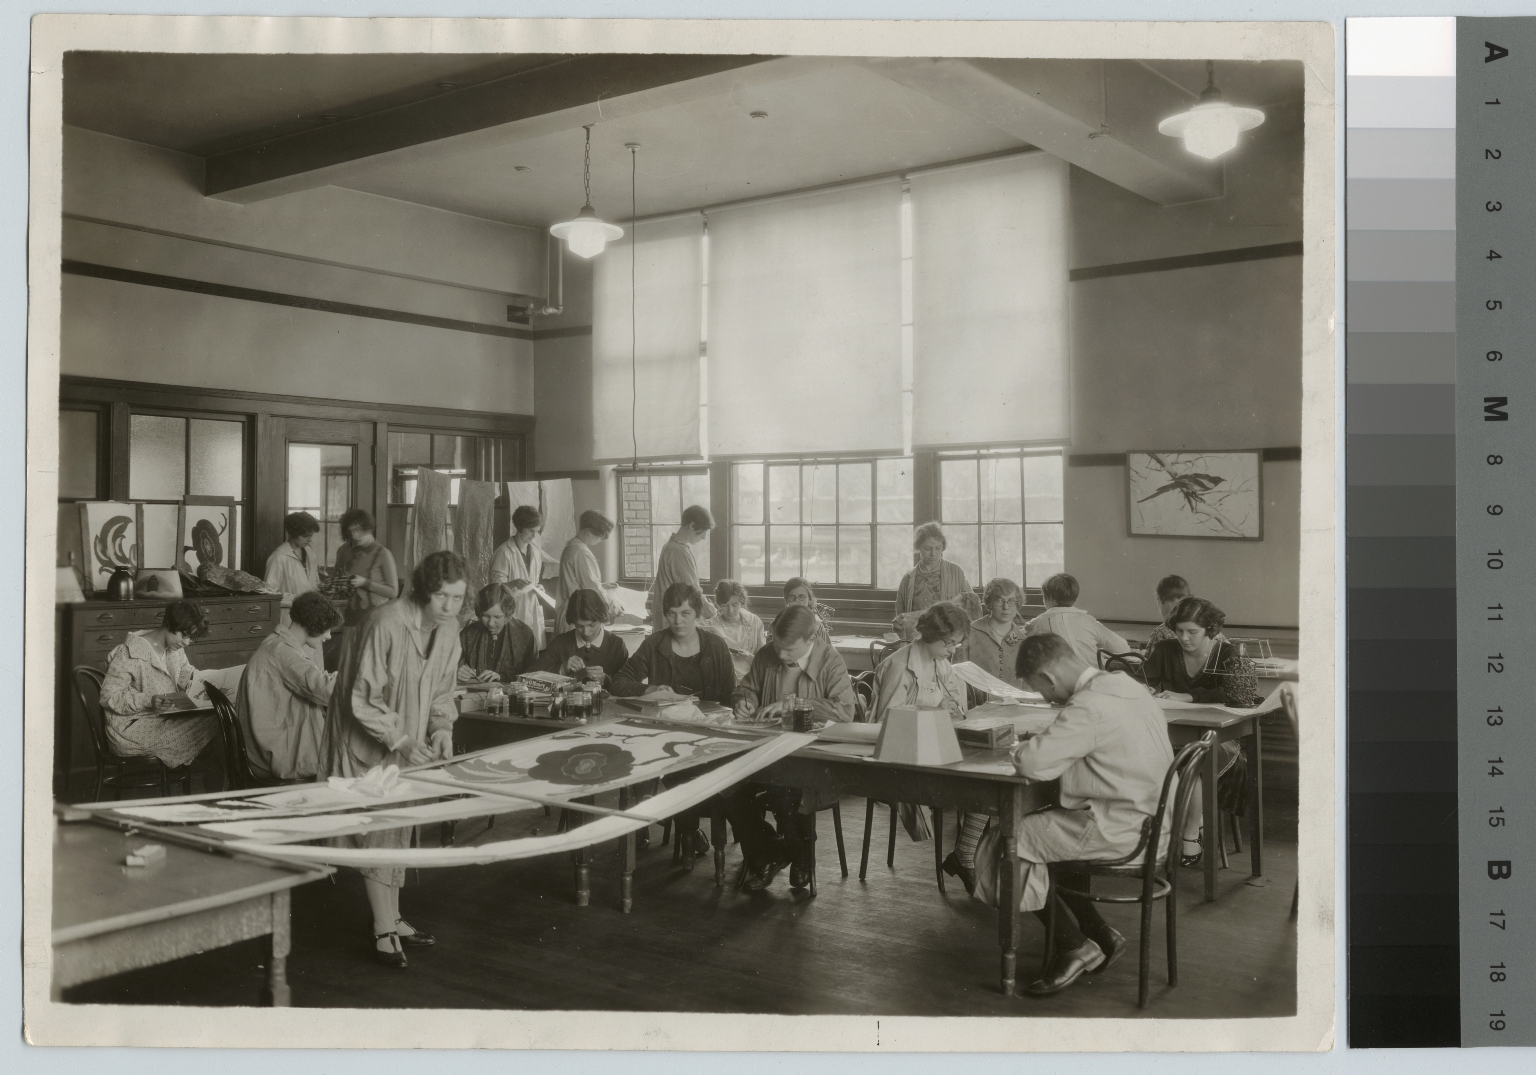 Crafts class, Deparatment of Applied and Fine Arts, Rochester Athenaeum and Mechanics Institute [1915-1930]